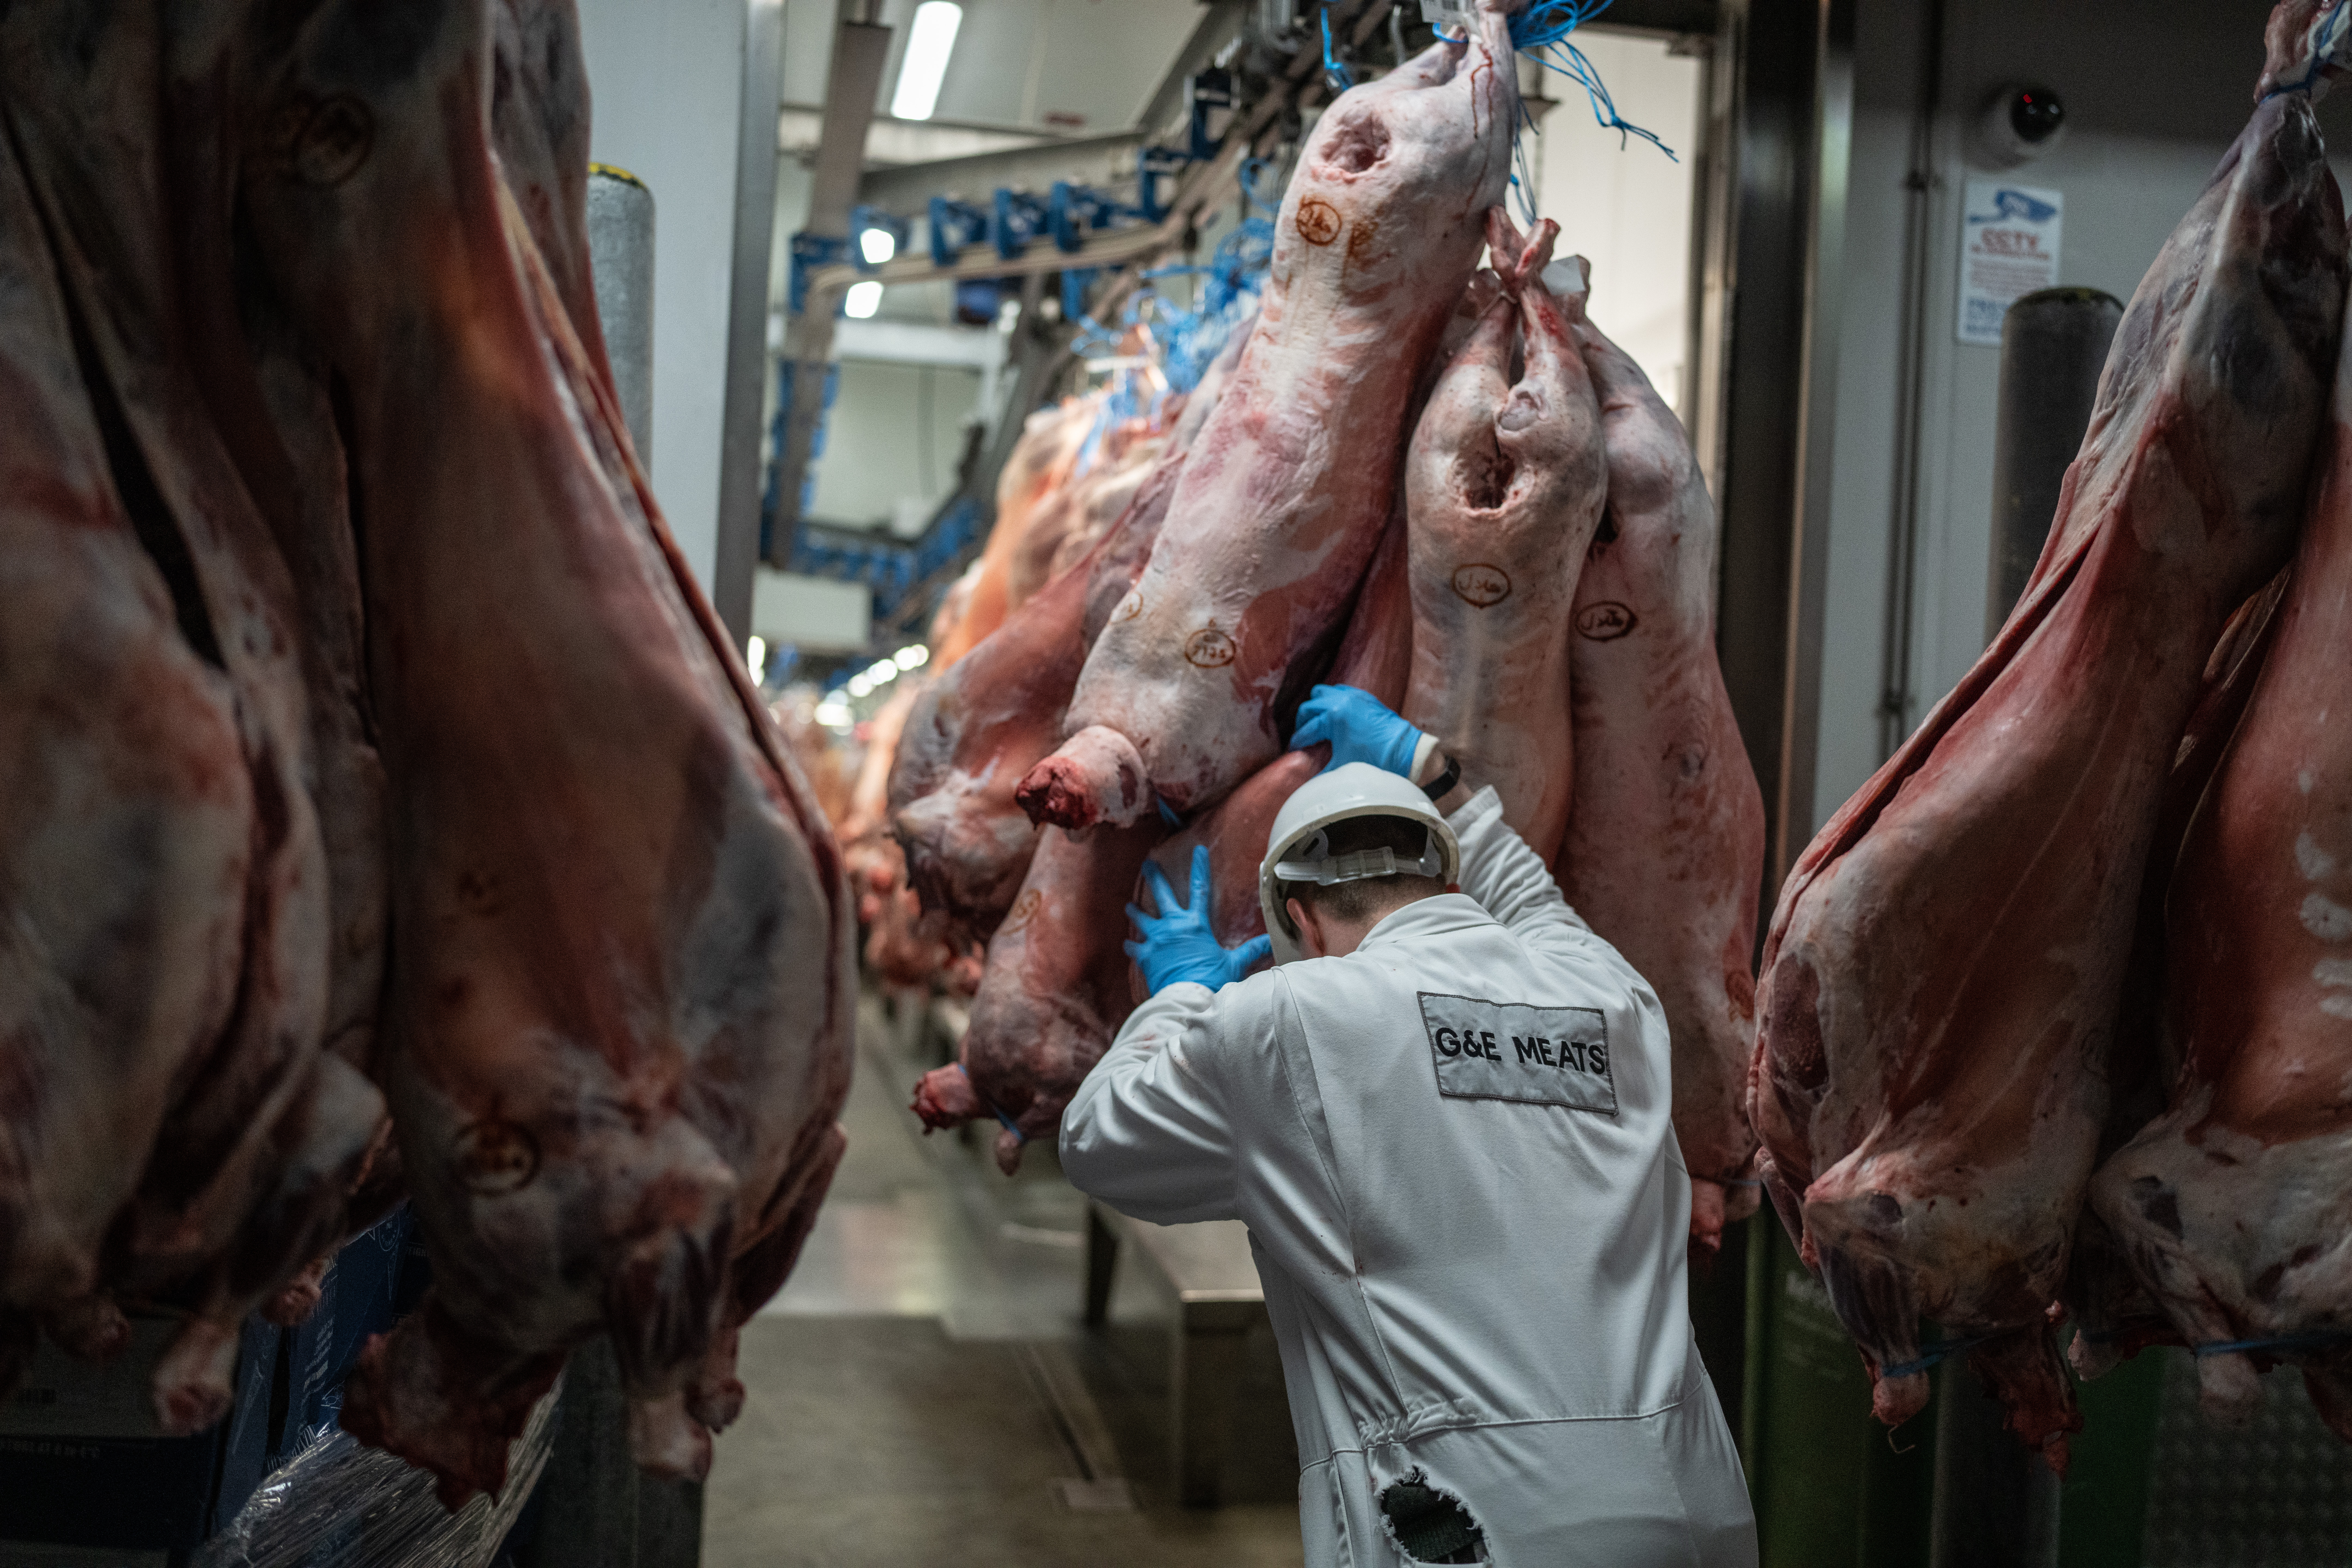 A worker moves newly-delivered pork to a wholesale butcher at Smithfield Market on Feb. 14, 2023 in London, England. Credit: Carl Court/Getty Images